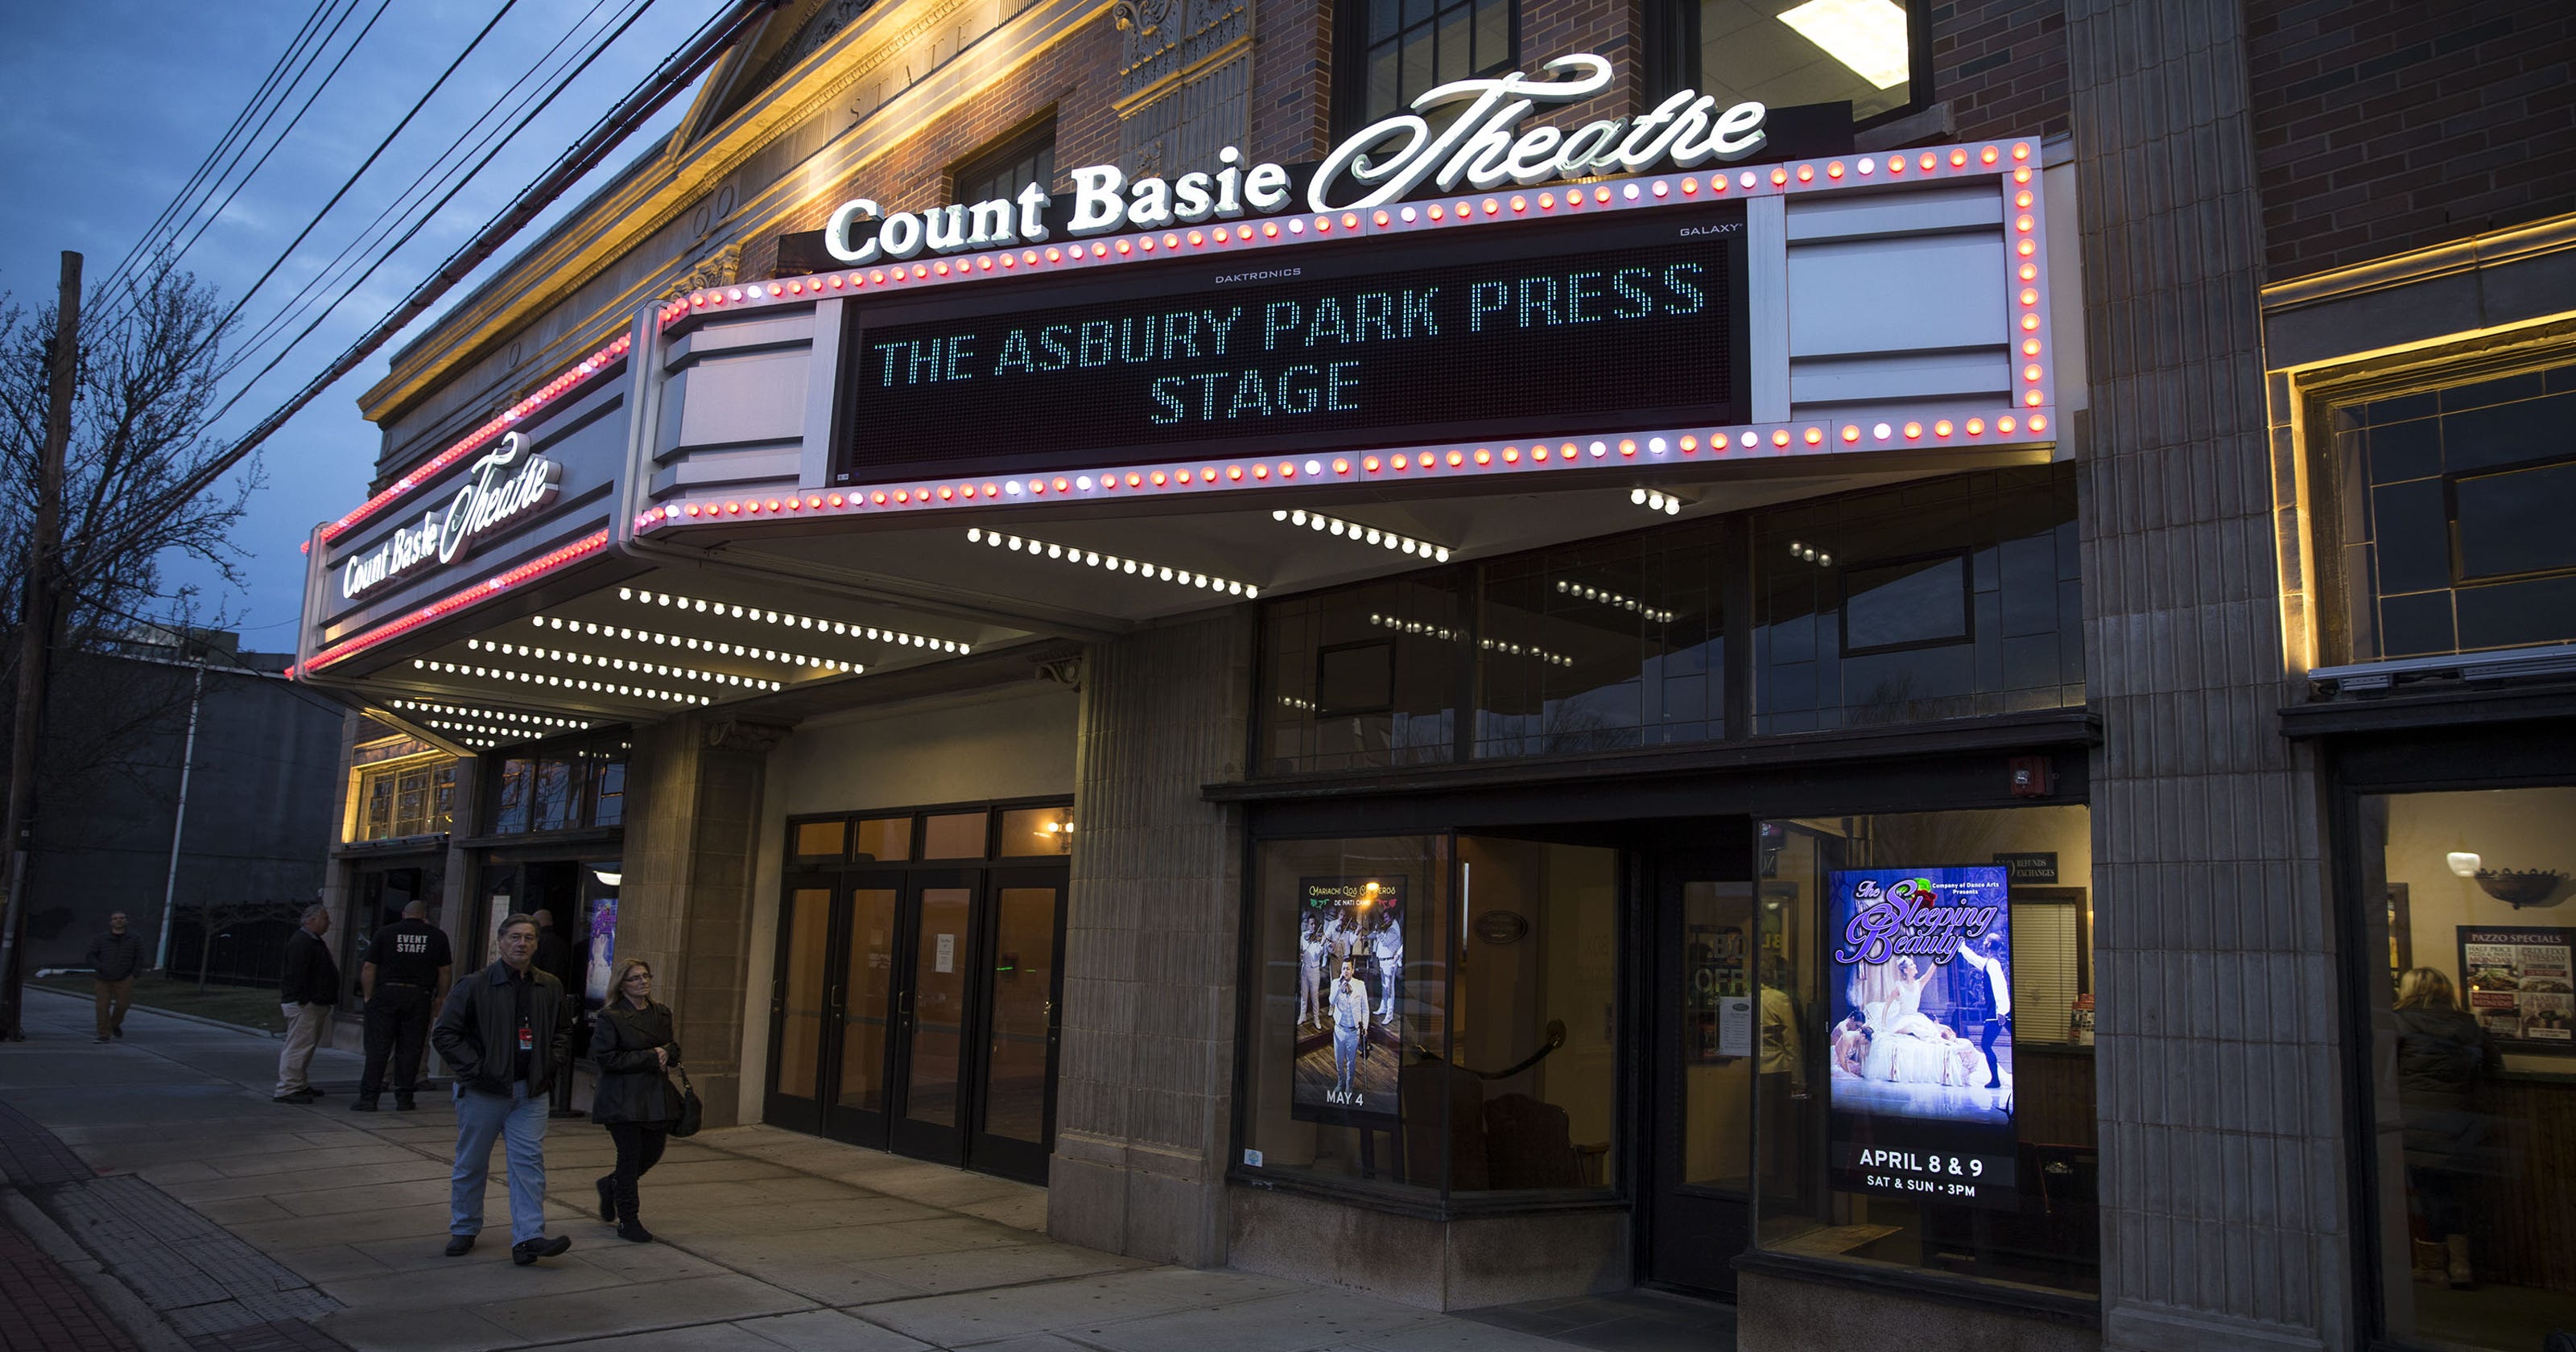 Count Basie Theatre: Big news for Red Bank arts landmark